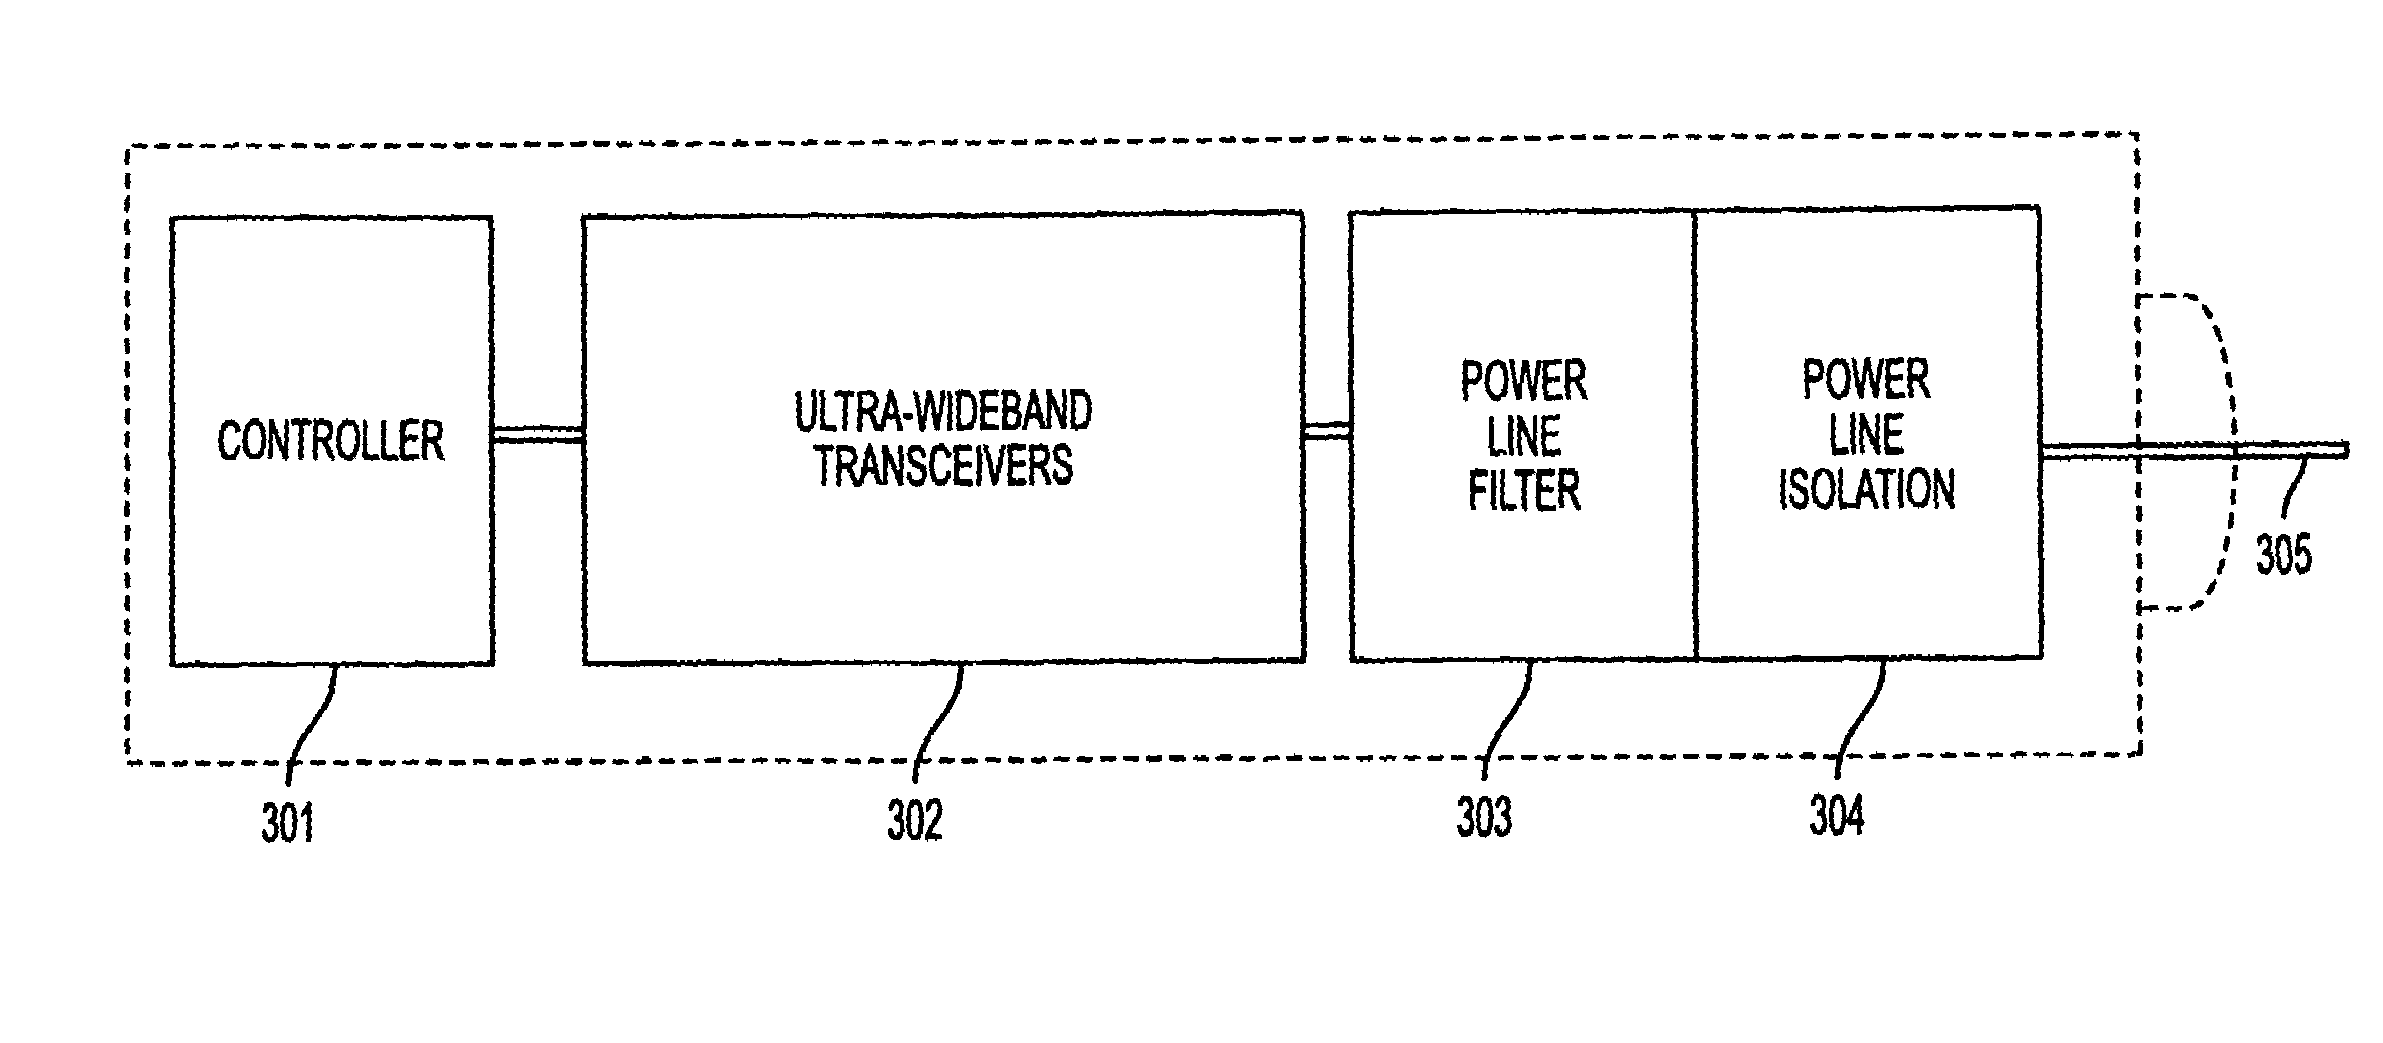 Ultra-wideband communication through local power lines